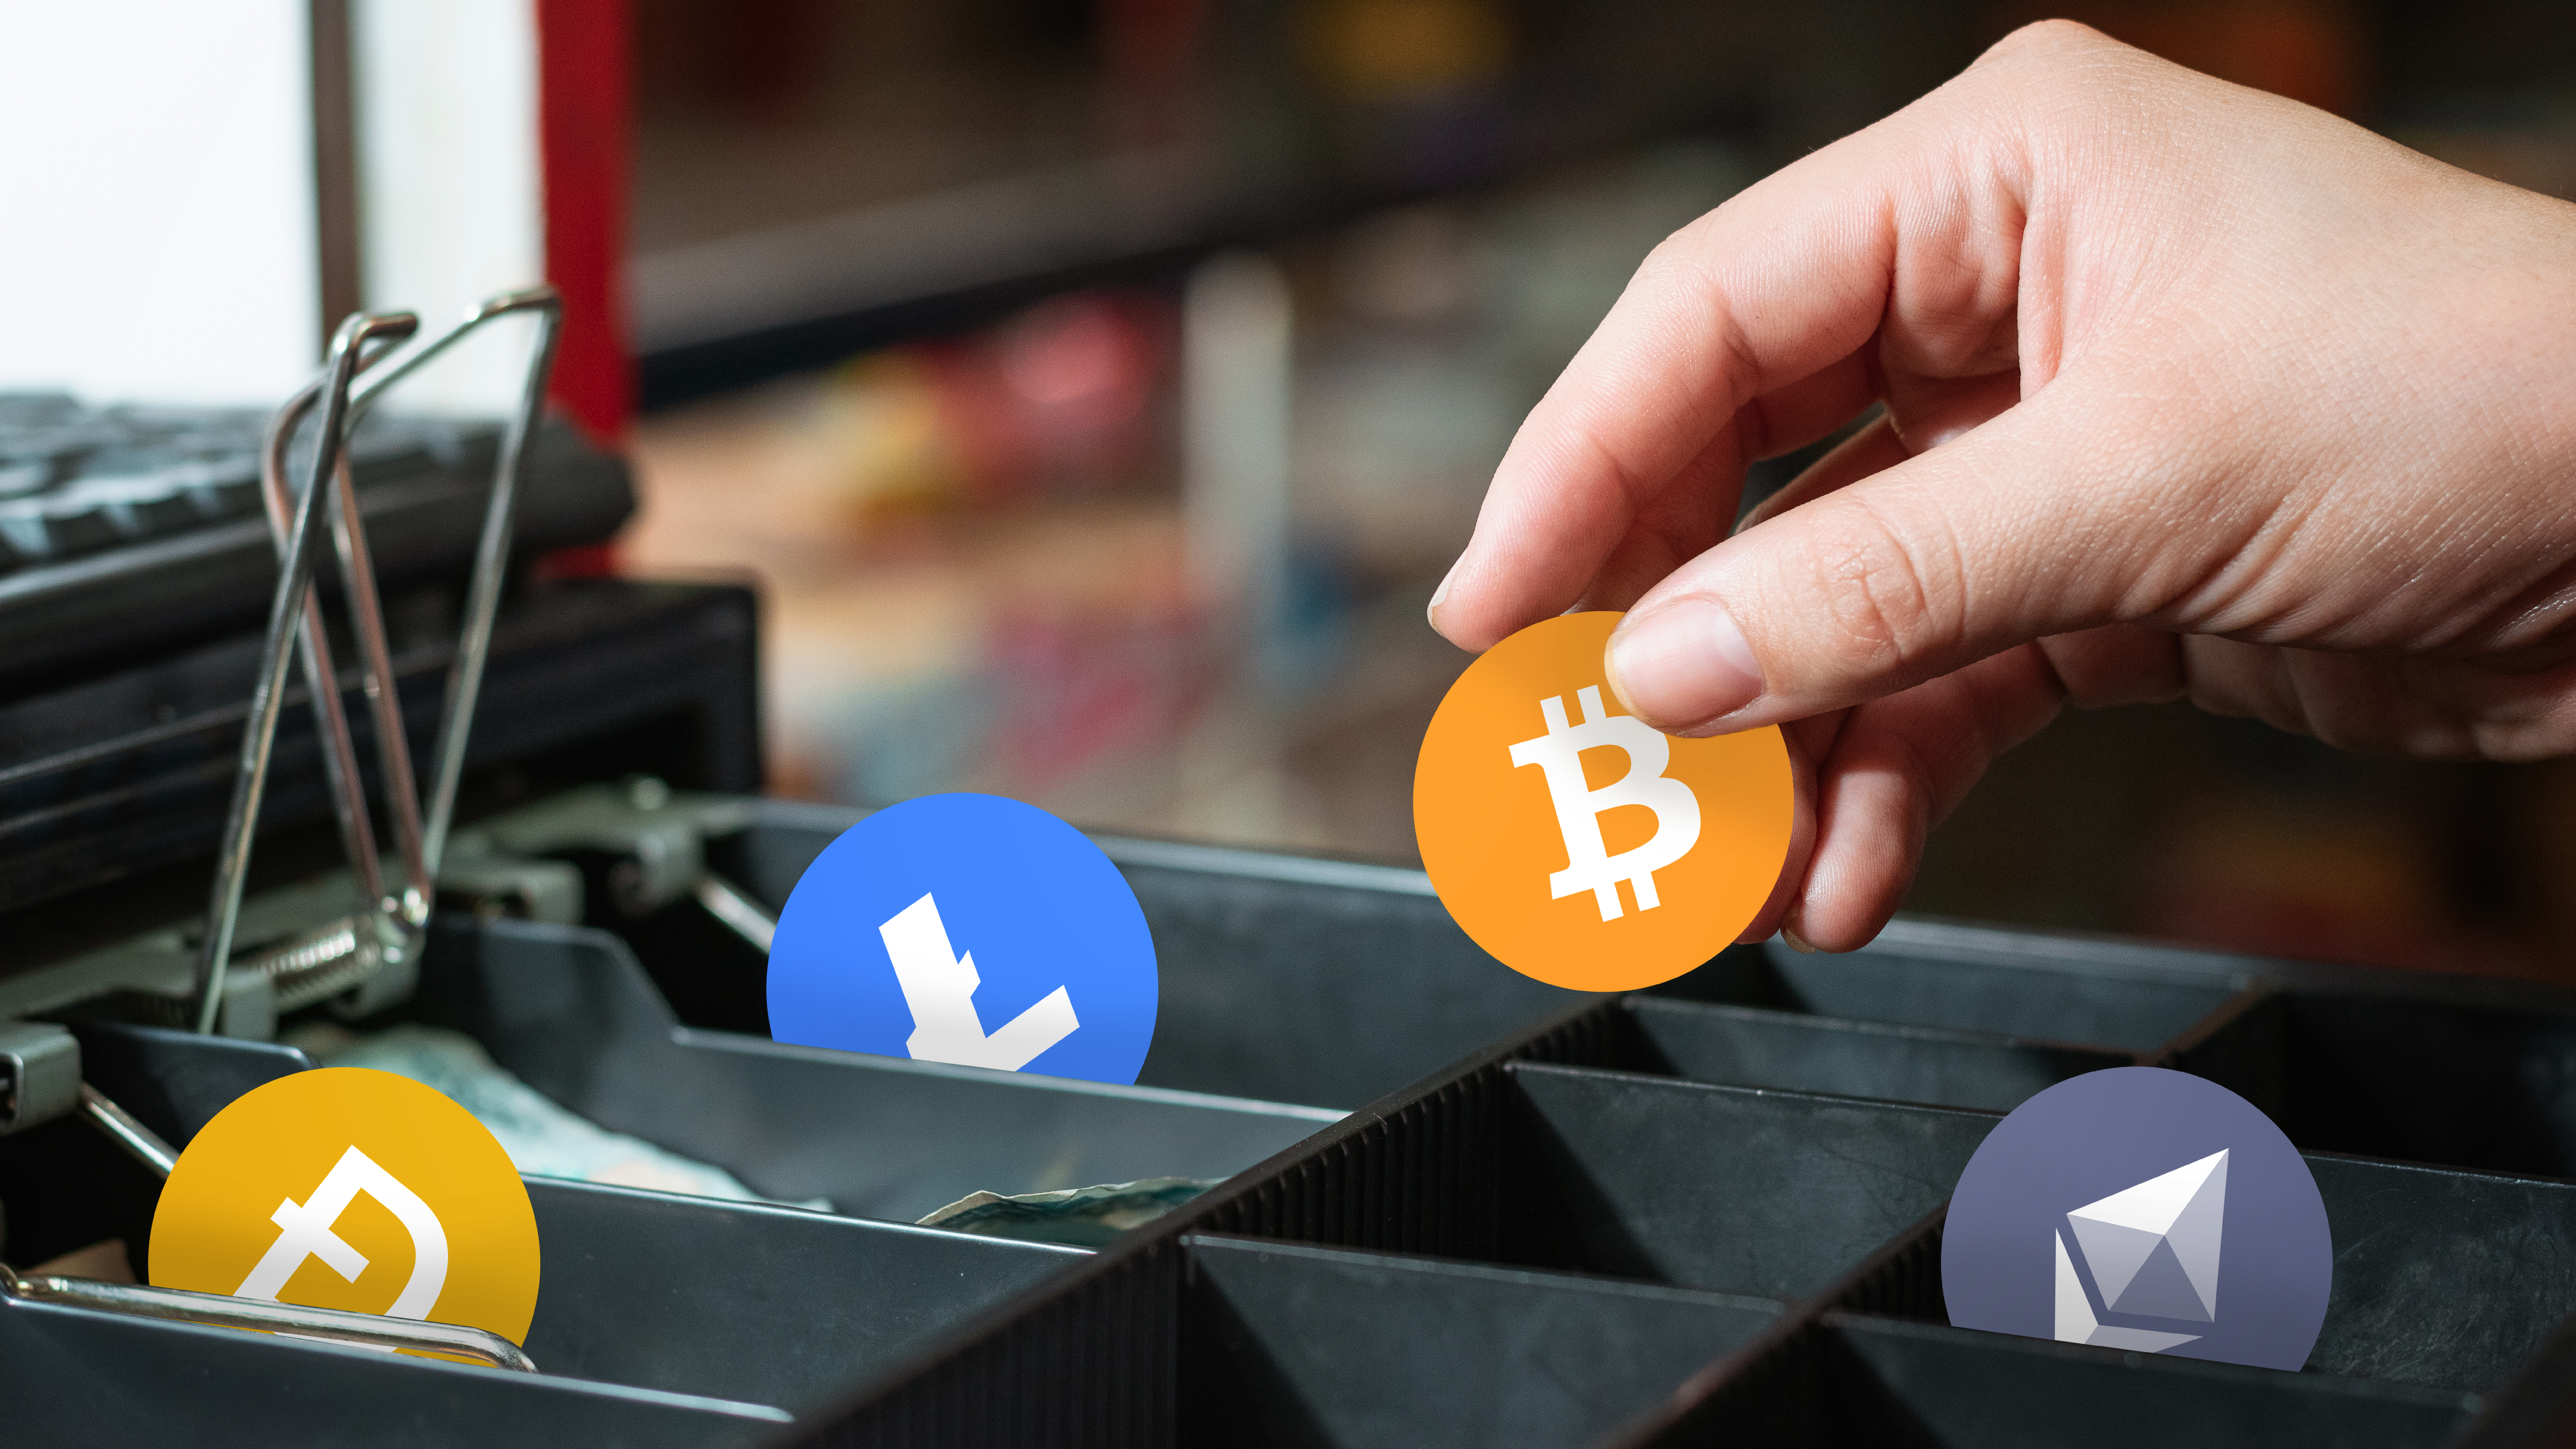 Cover Image for Weekly Flip Thru: More Retailers Eyeing Crypto Payment Options, Bitcoin ATMs Return to Japan After 4-Year Hiatus